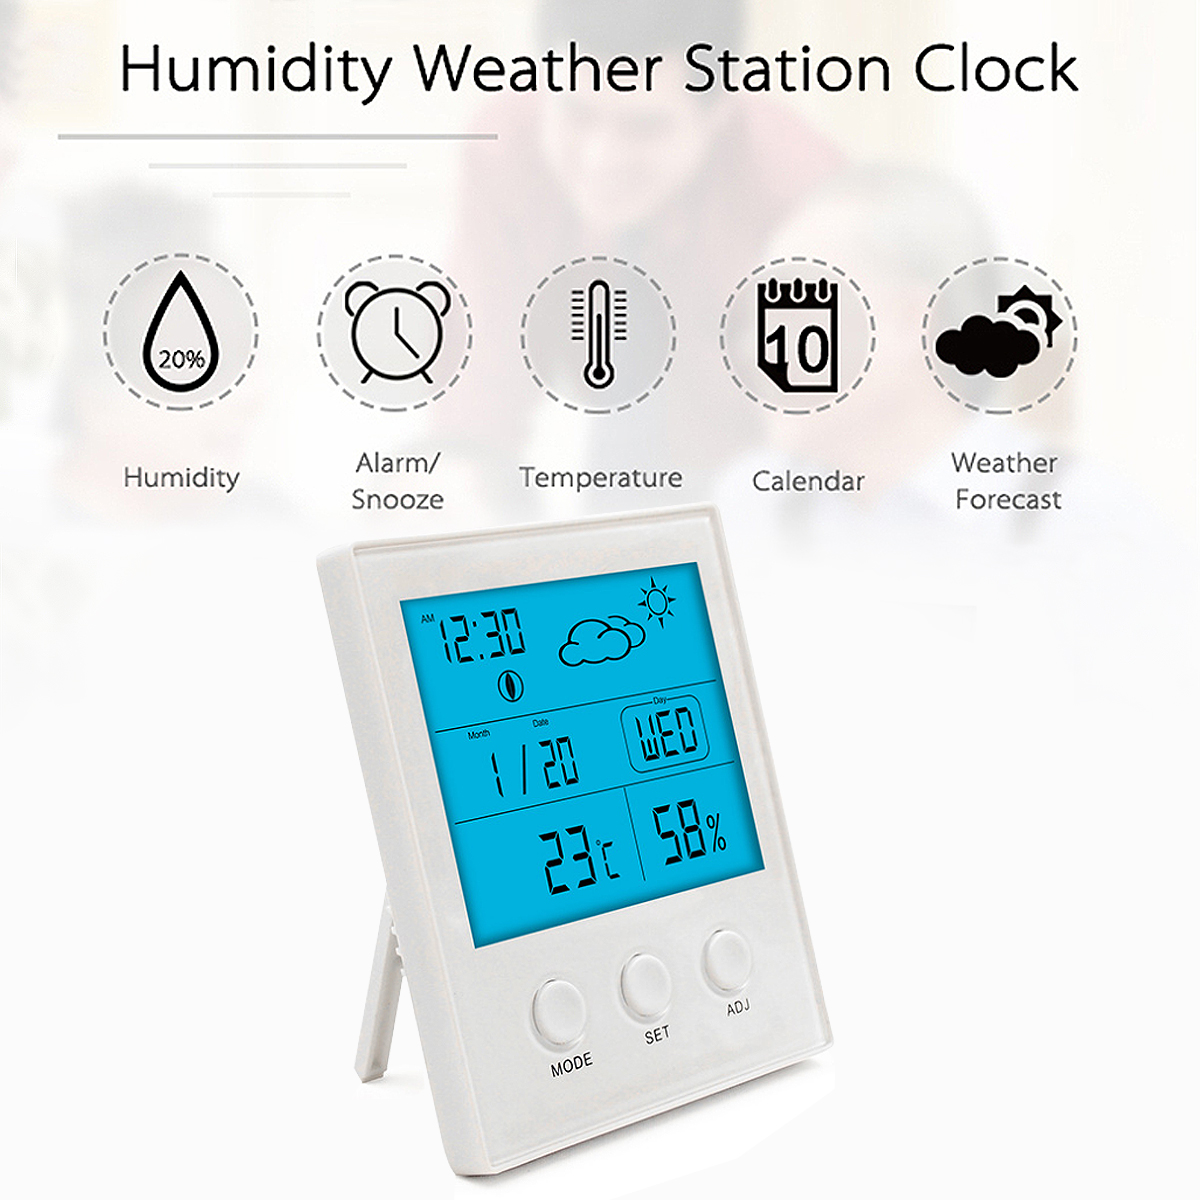 CH-904-Digital-Thermometer-Hygrometer-Temperature-Humidity-Tester-LED-Backlight-Time-Date-Calendar-A-1245366-1